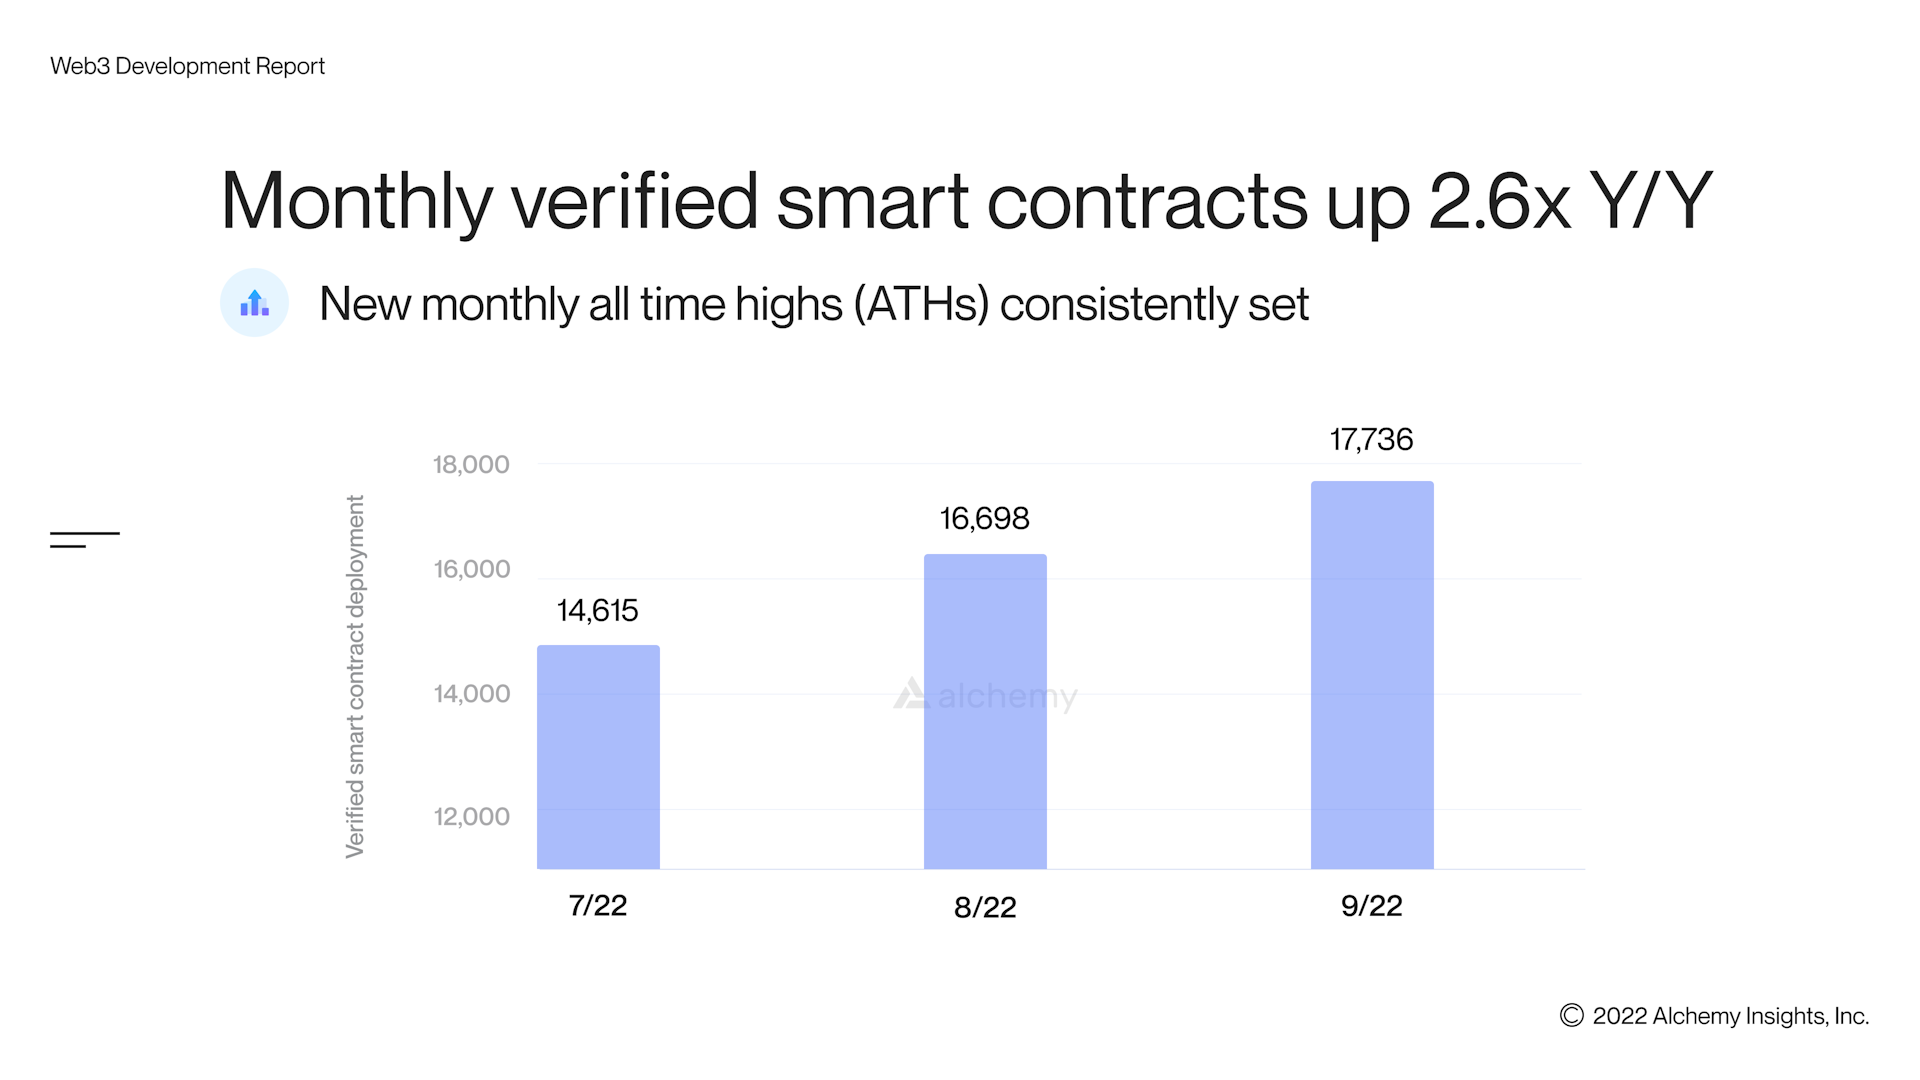 Monthly verified smart contracts published in Q3 2022.